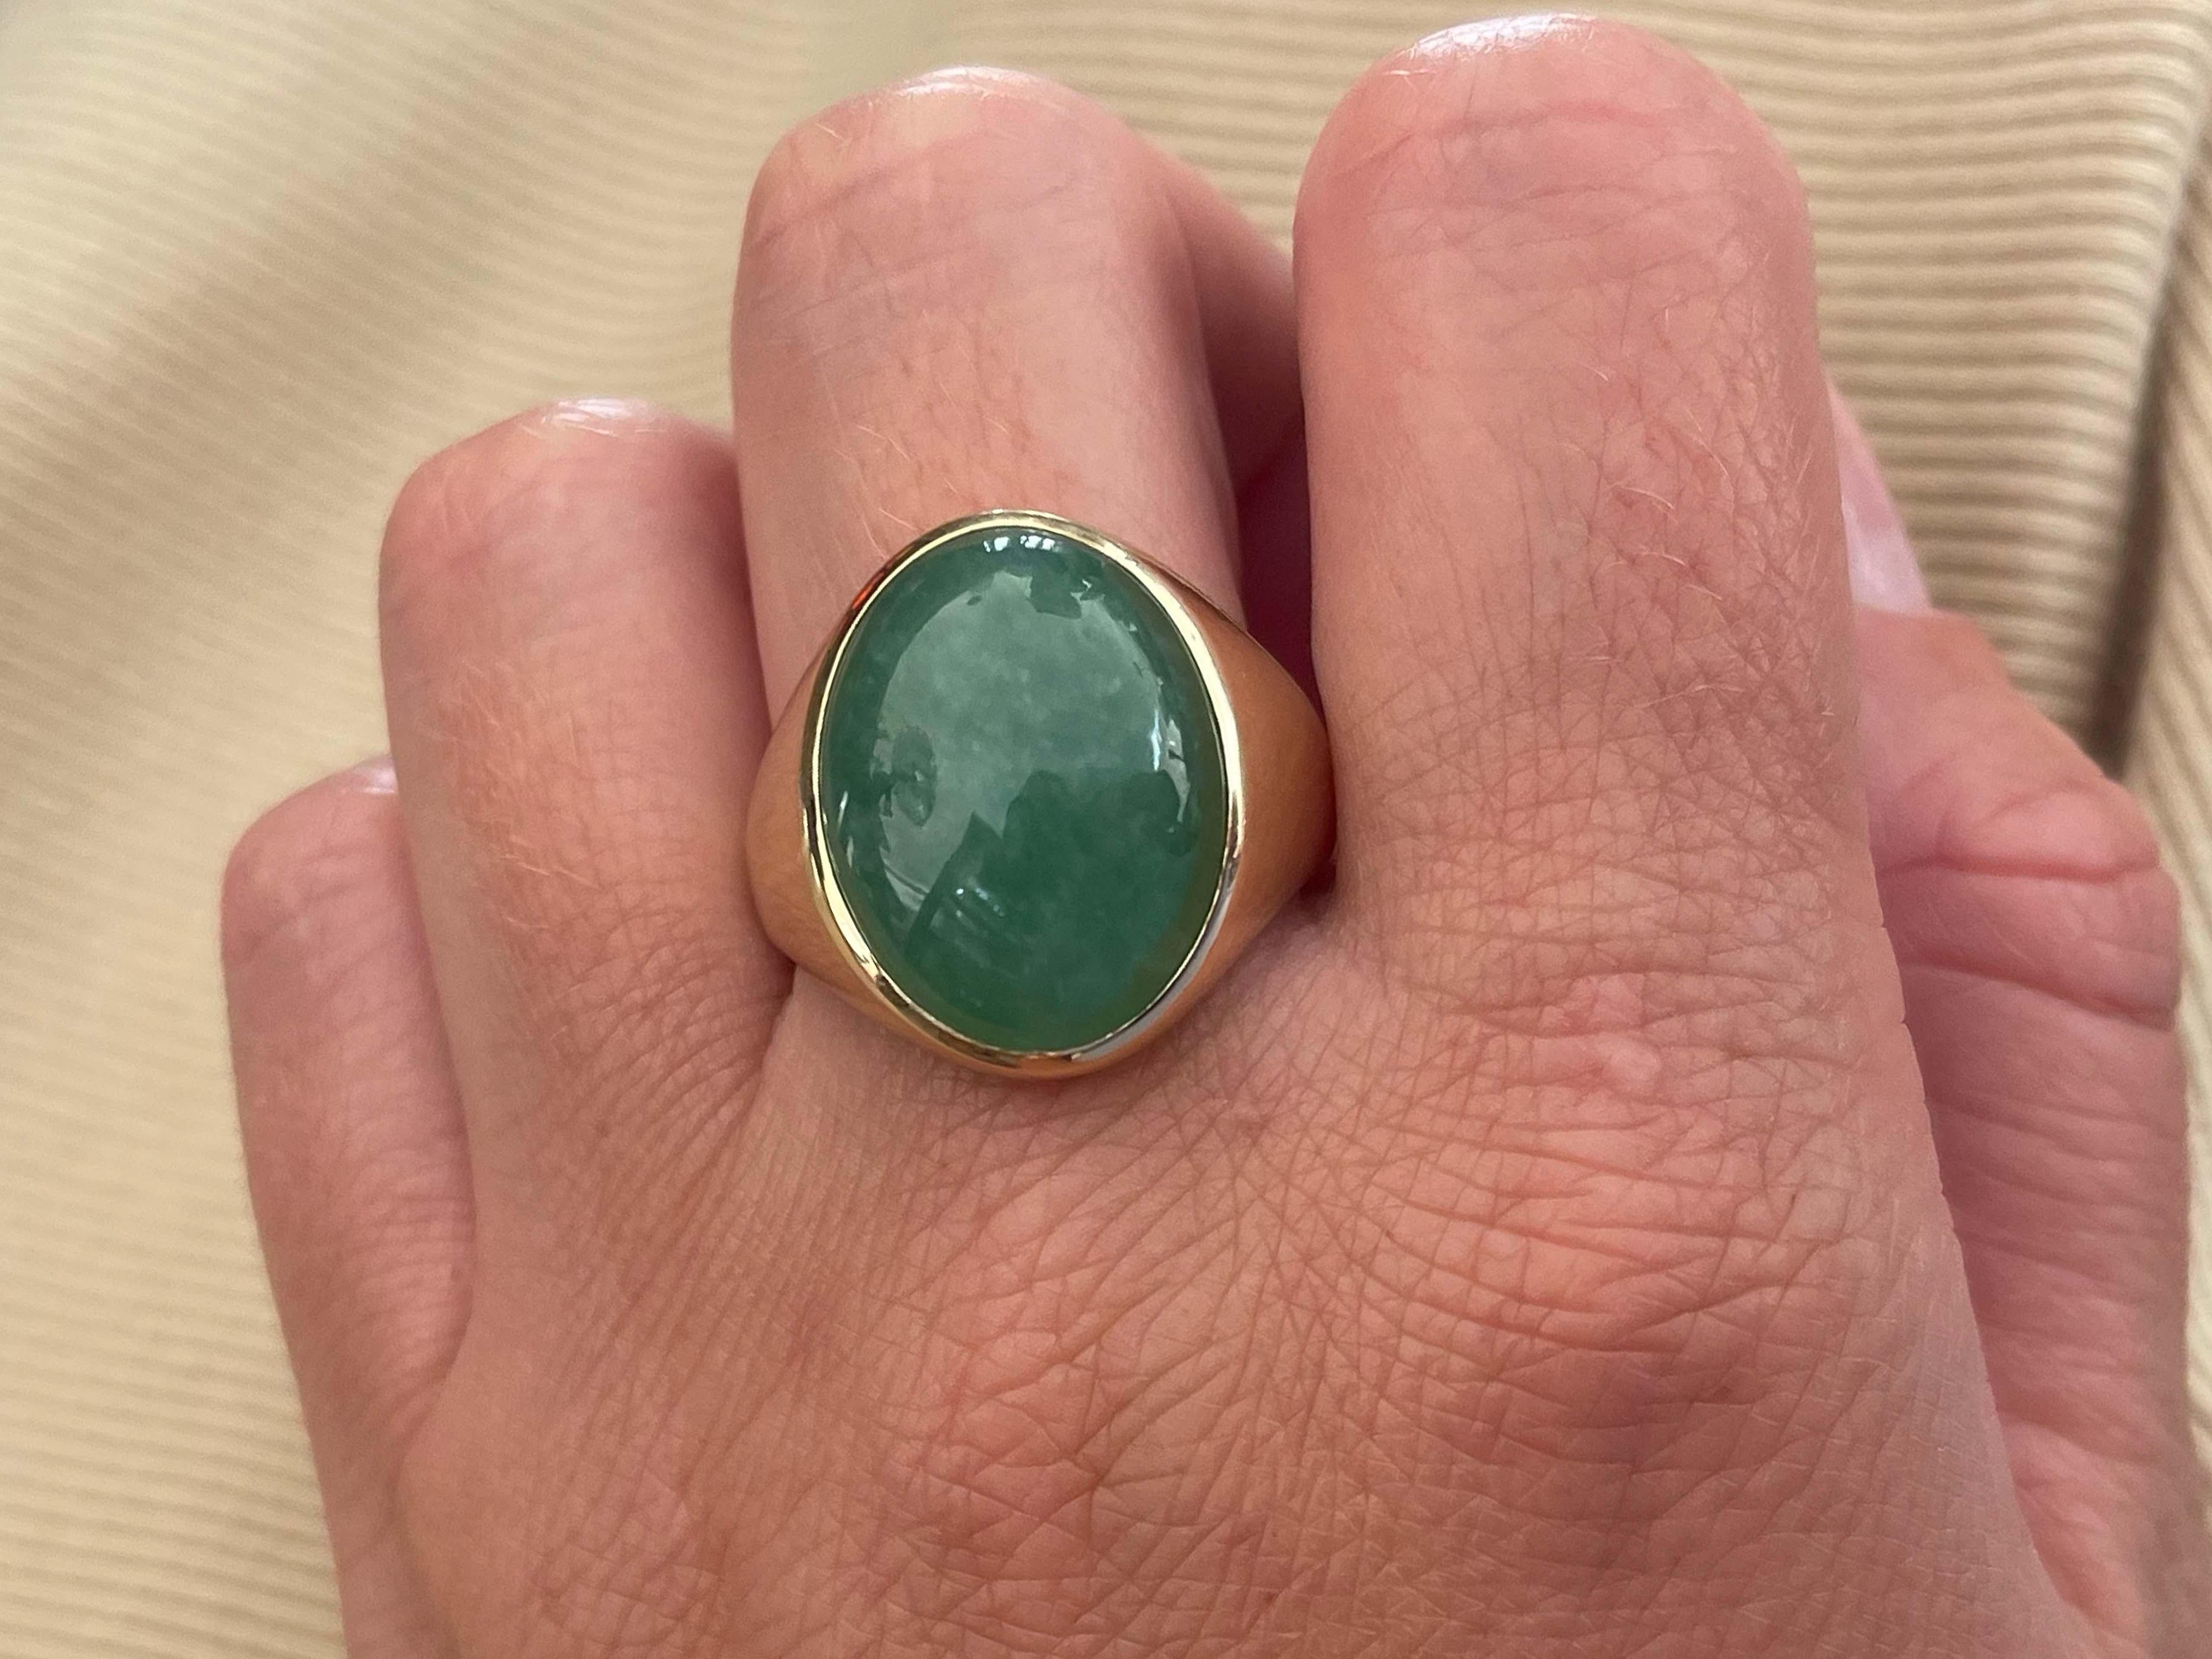 Item Specifications:

Metal: 14k Yellow Gold 

Style: Statement Ring

Ring Size: 10.75 (resizing available for a fee)

Total Weight: 13.1 Grams

Gemstone Specifications:

Center Gemstone: Jadeite Jade

Shape: Oval

Color: Green

Cut: